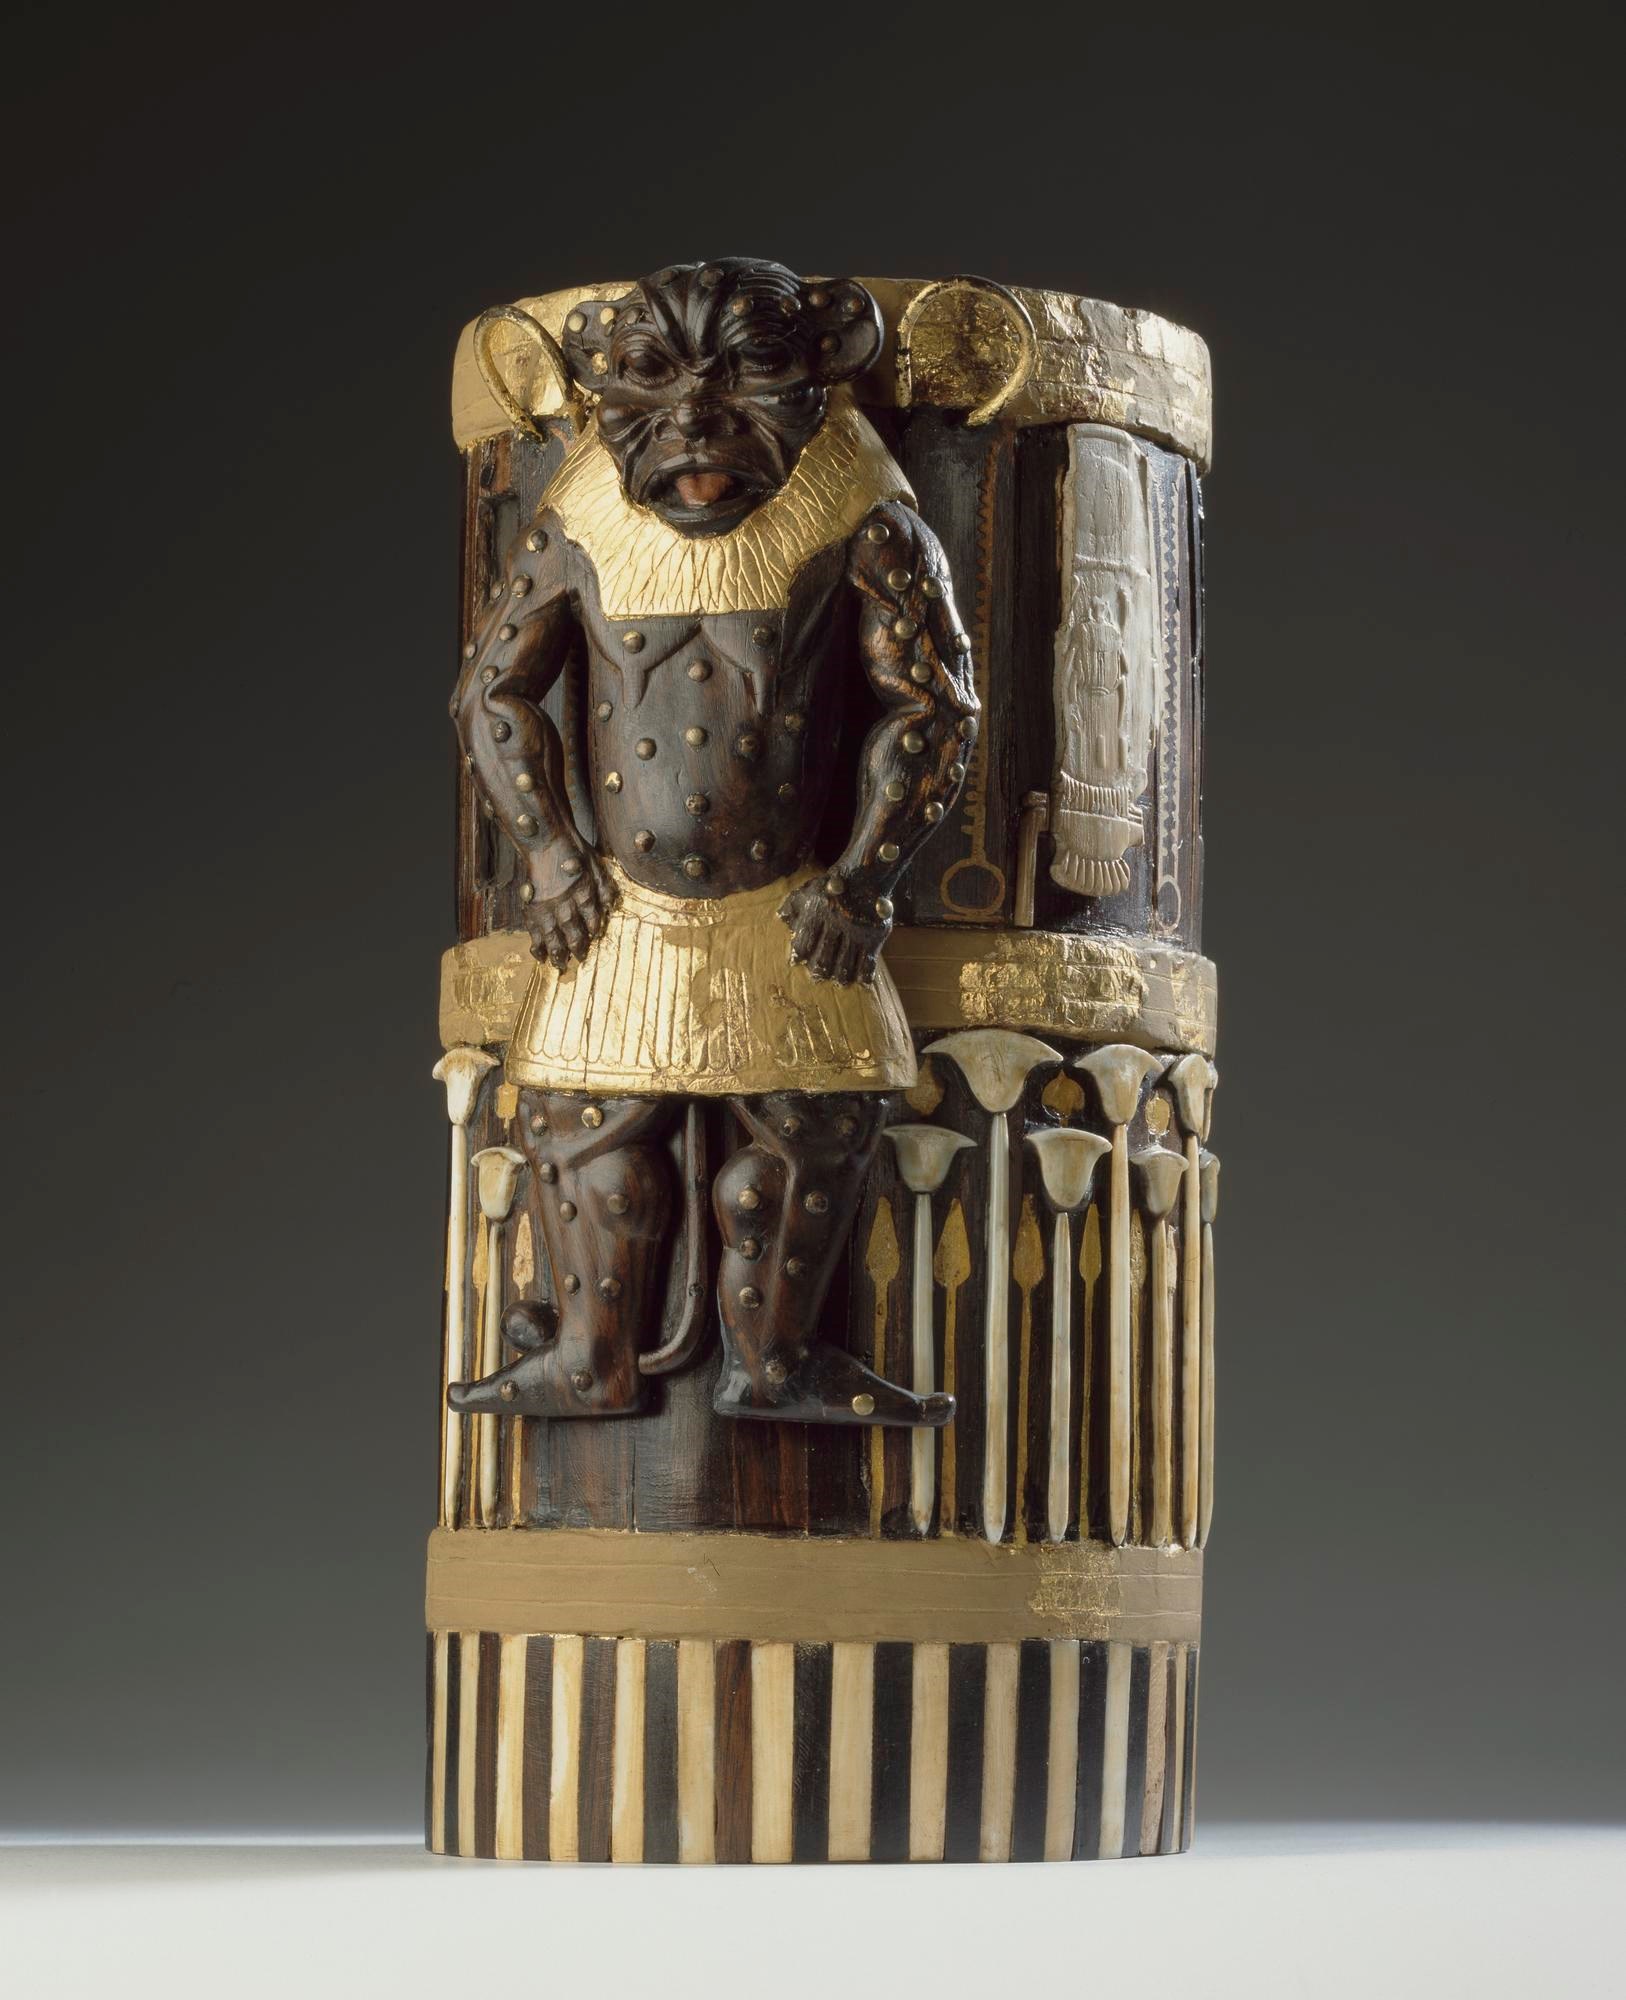 Box of cedar wood with ebony veneers and ivory inlays and gilding depicting the god Bes and bearing the cartouches of Amenhotep II: Ancient Egyptian, New Kingdom, 18th Dynasty, c.1550-1295 BC.